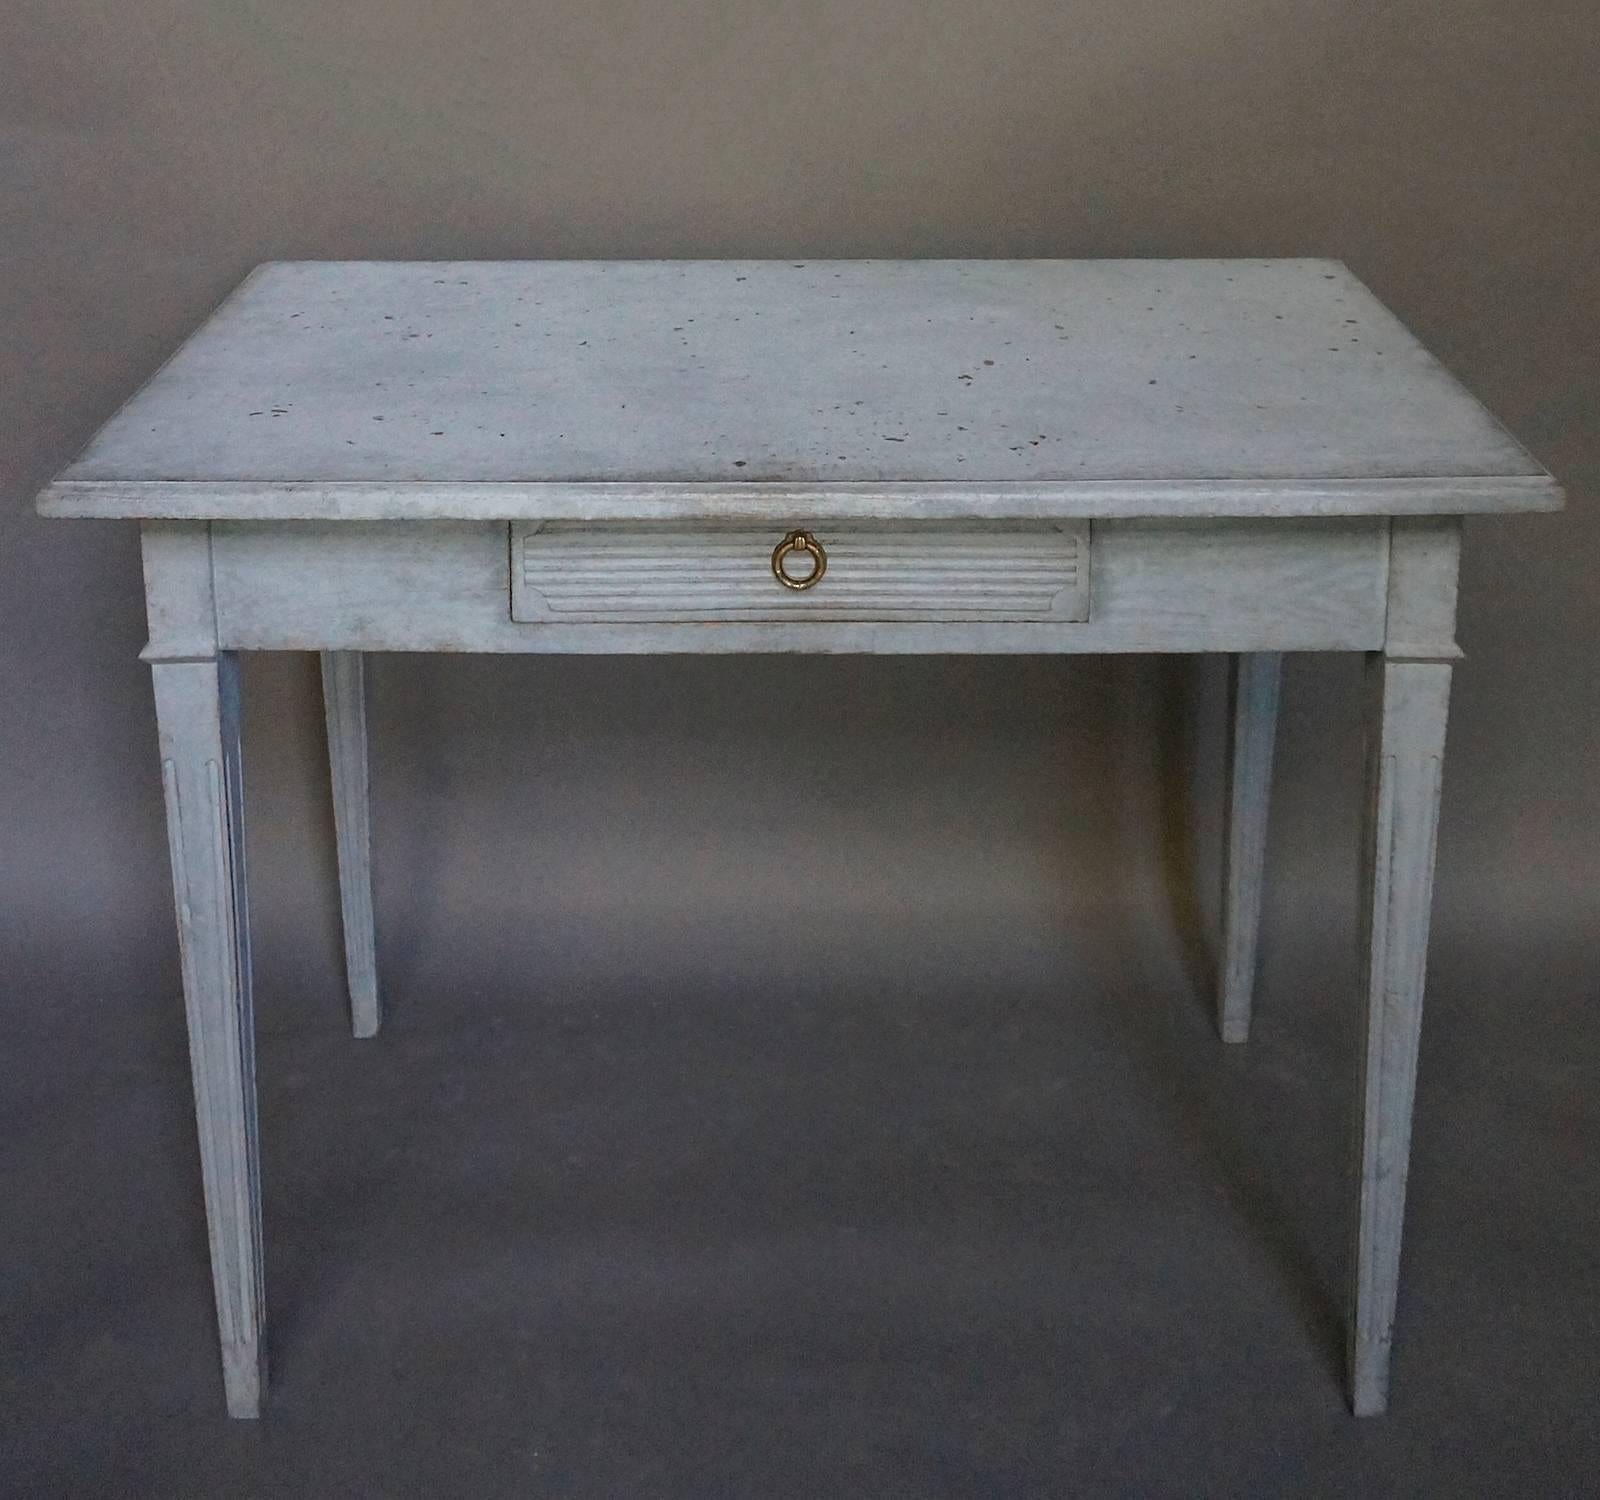 Side table, Sweden, circa 1860, with neoclassical detail. The single apron drawer has a shaped panel of horizontal reeding, and the tapering legs are also reeded.